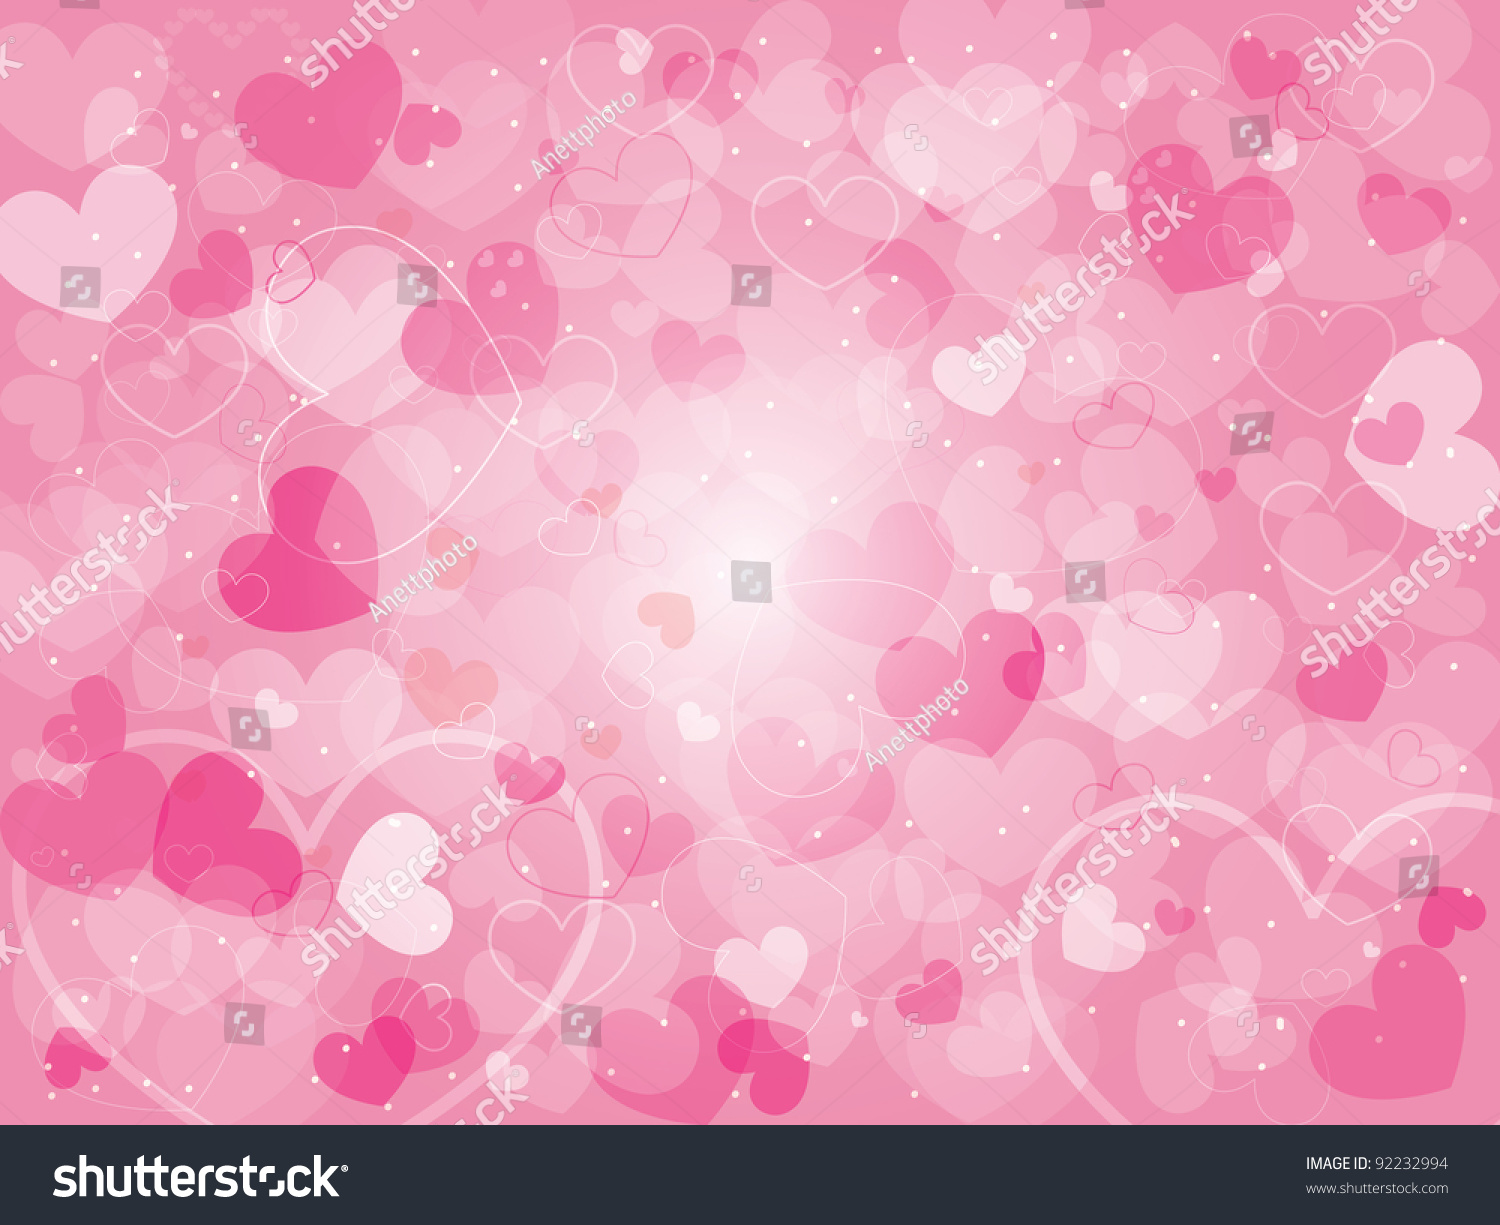 valentines day background clipart - photo #27